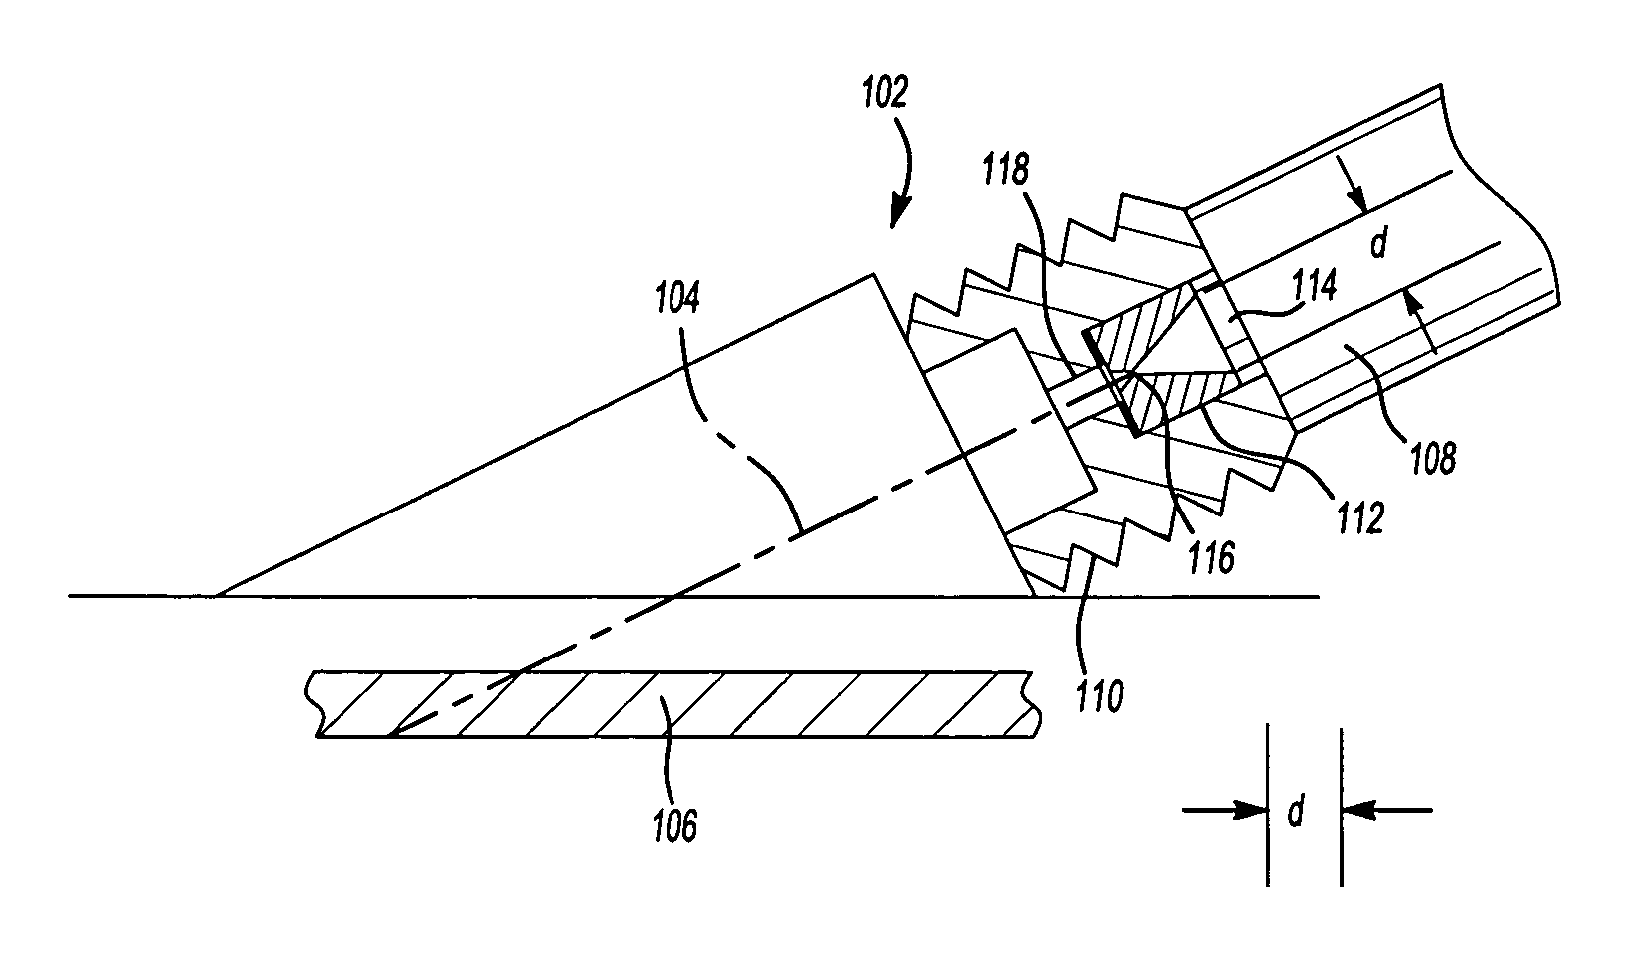 Suspended abrasive waterjet hole drilling system and method